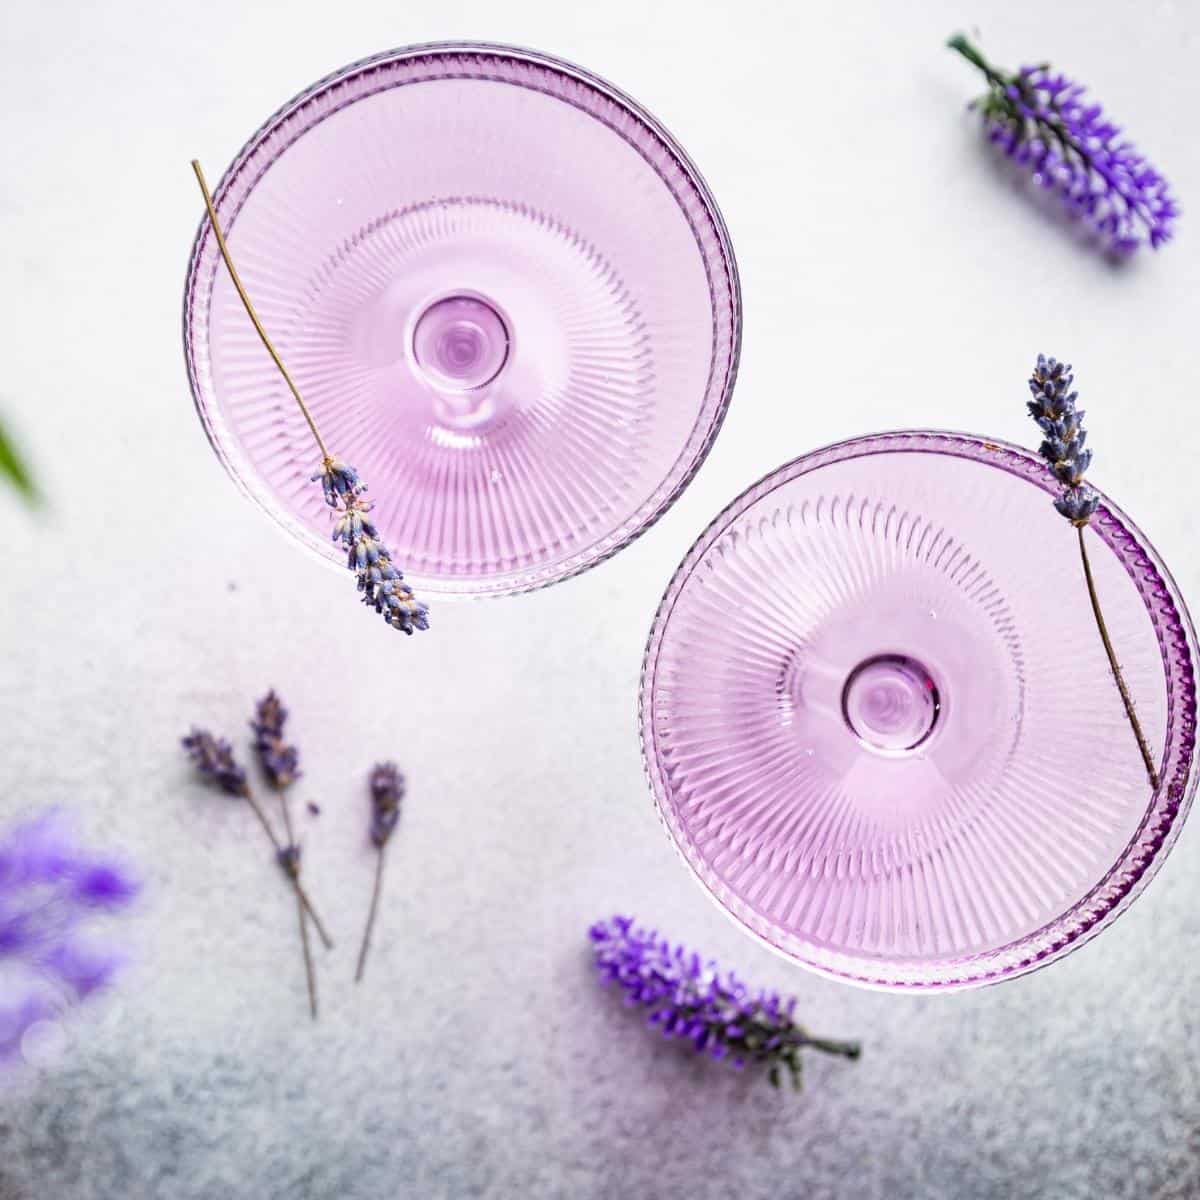 Top view of two purple cocktails garnished with sprigs of lavender.